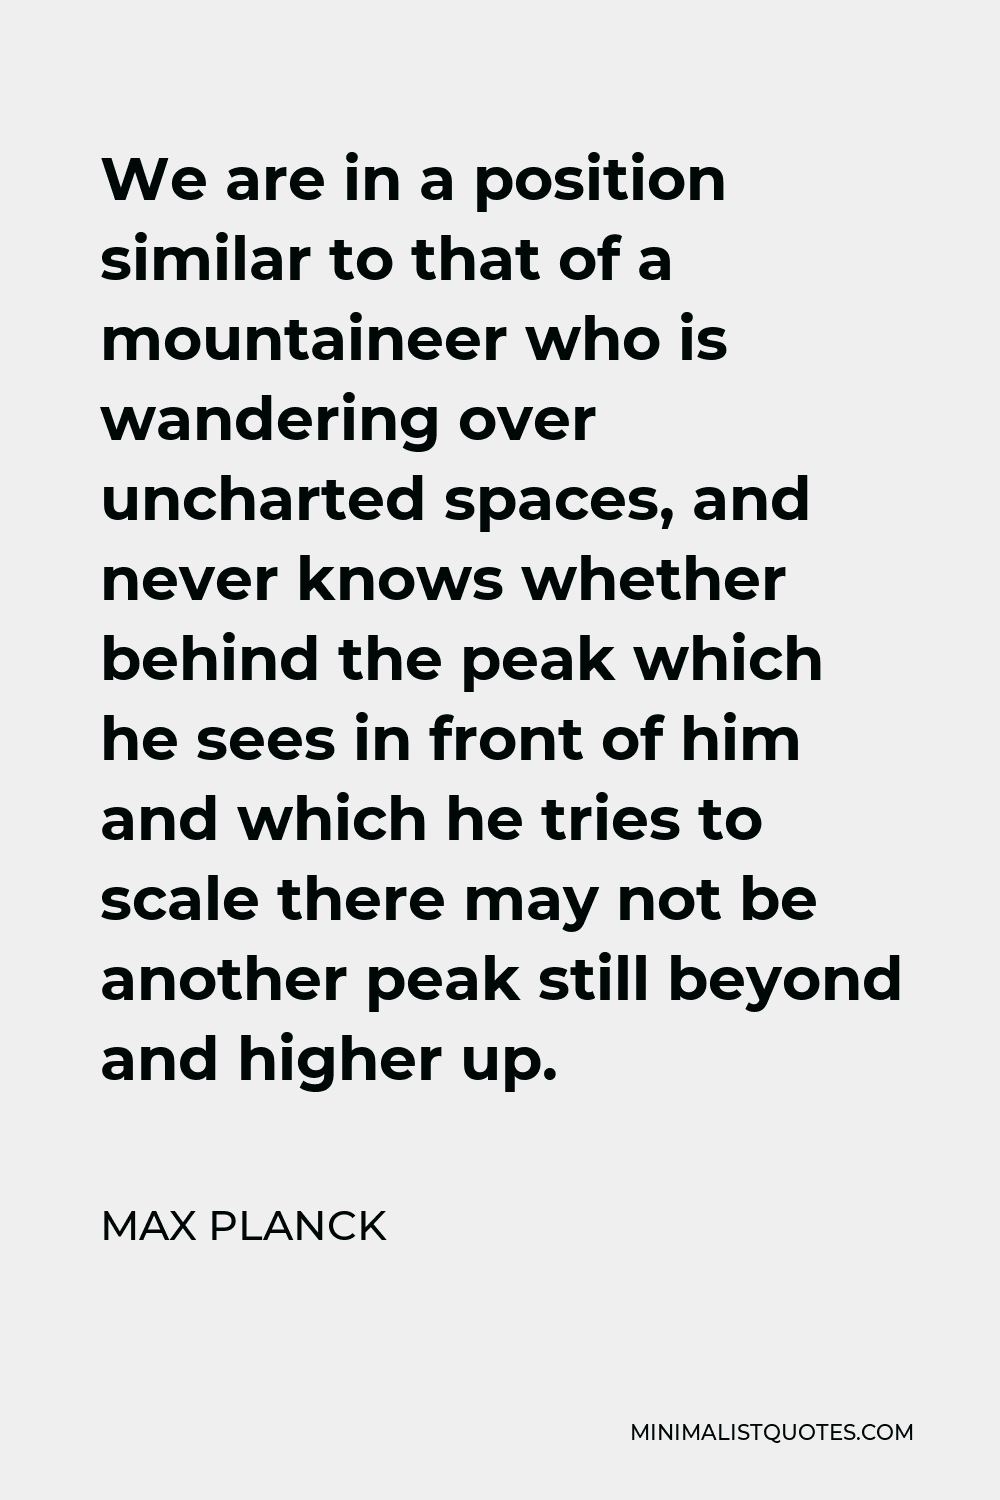 Max Planck Quote - We are in a position similar to that of a mountaineer who is wandering over uncharted spaces, and never knows whether behind the peak which he sees in front of him and which he tries to scale there may not be another peak still beyond and higher up.